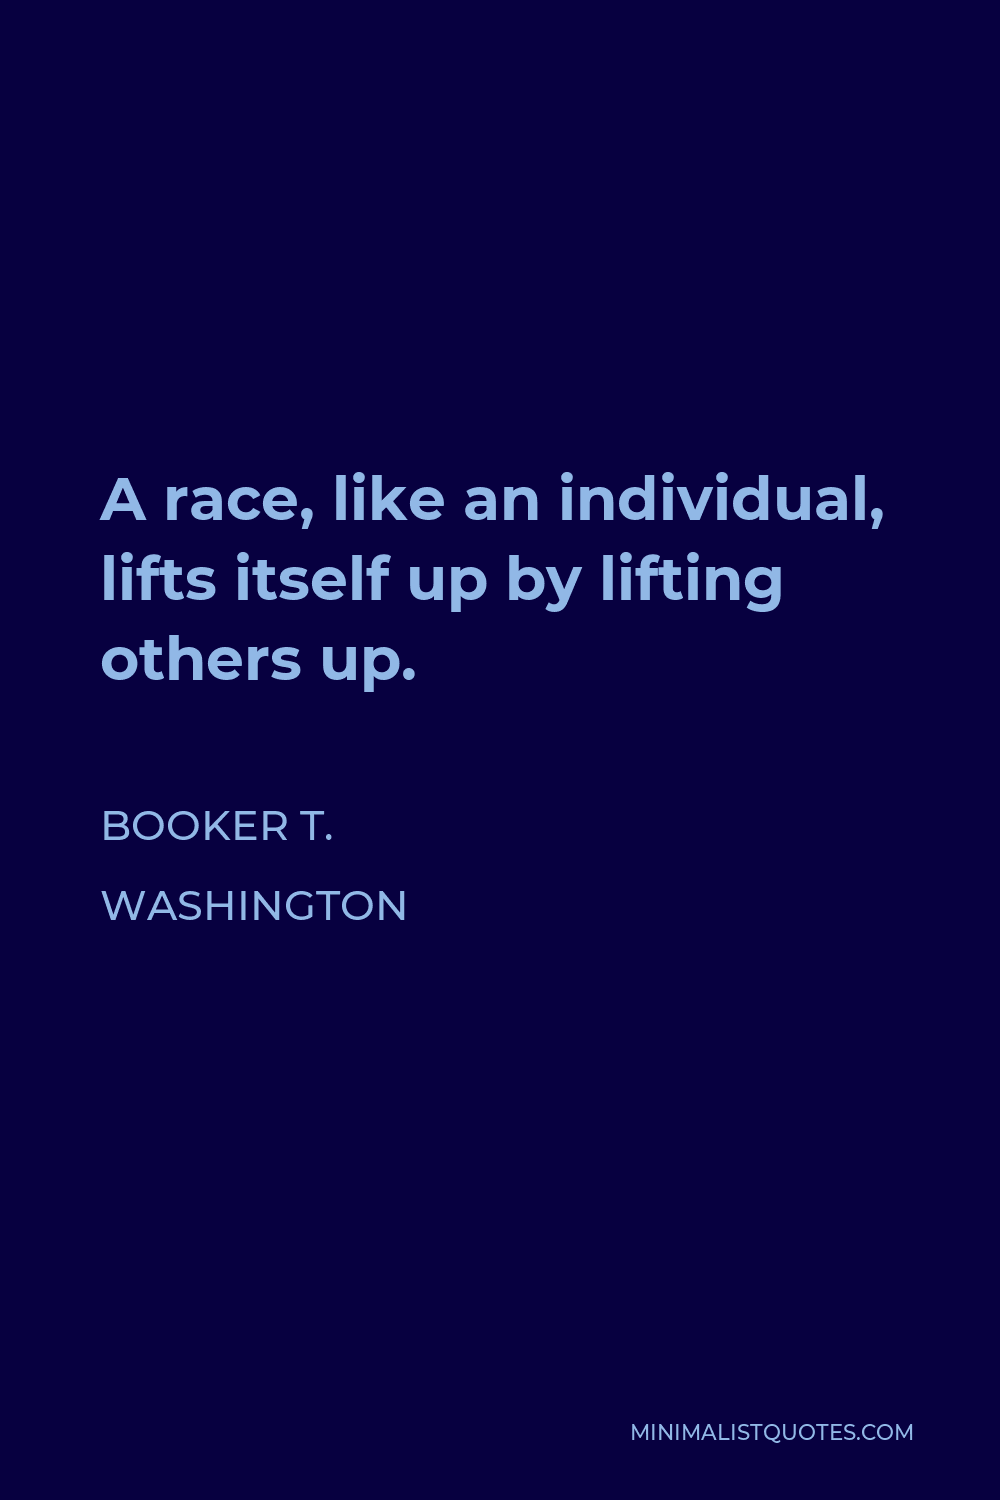 Booker T. Washington Quote - A race, like an individual, lifts itself up by lifting others up.